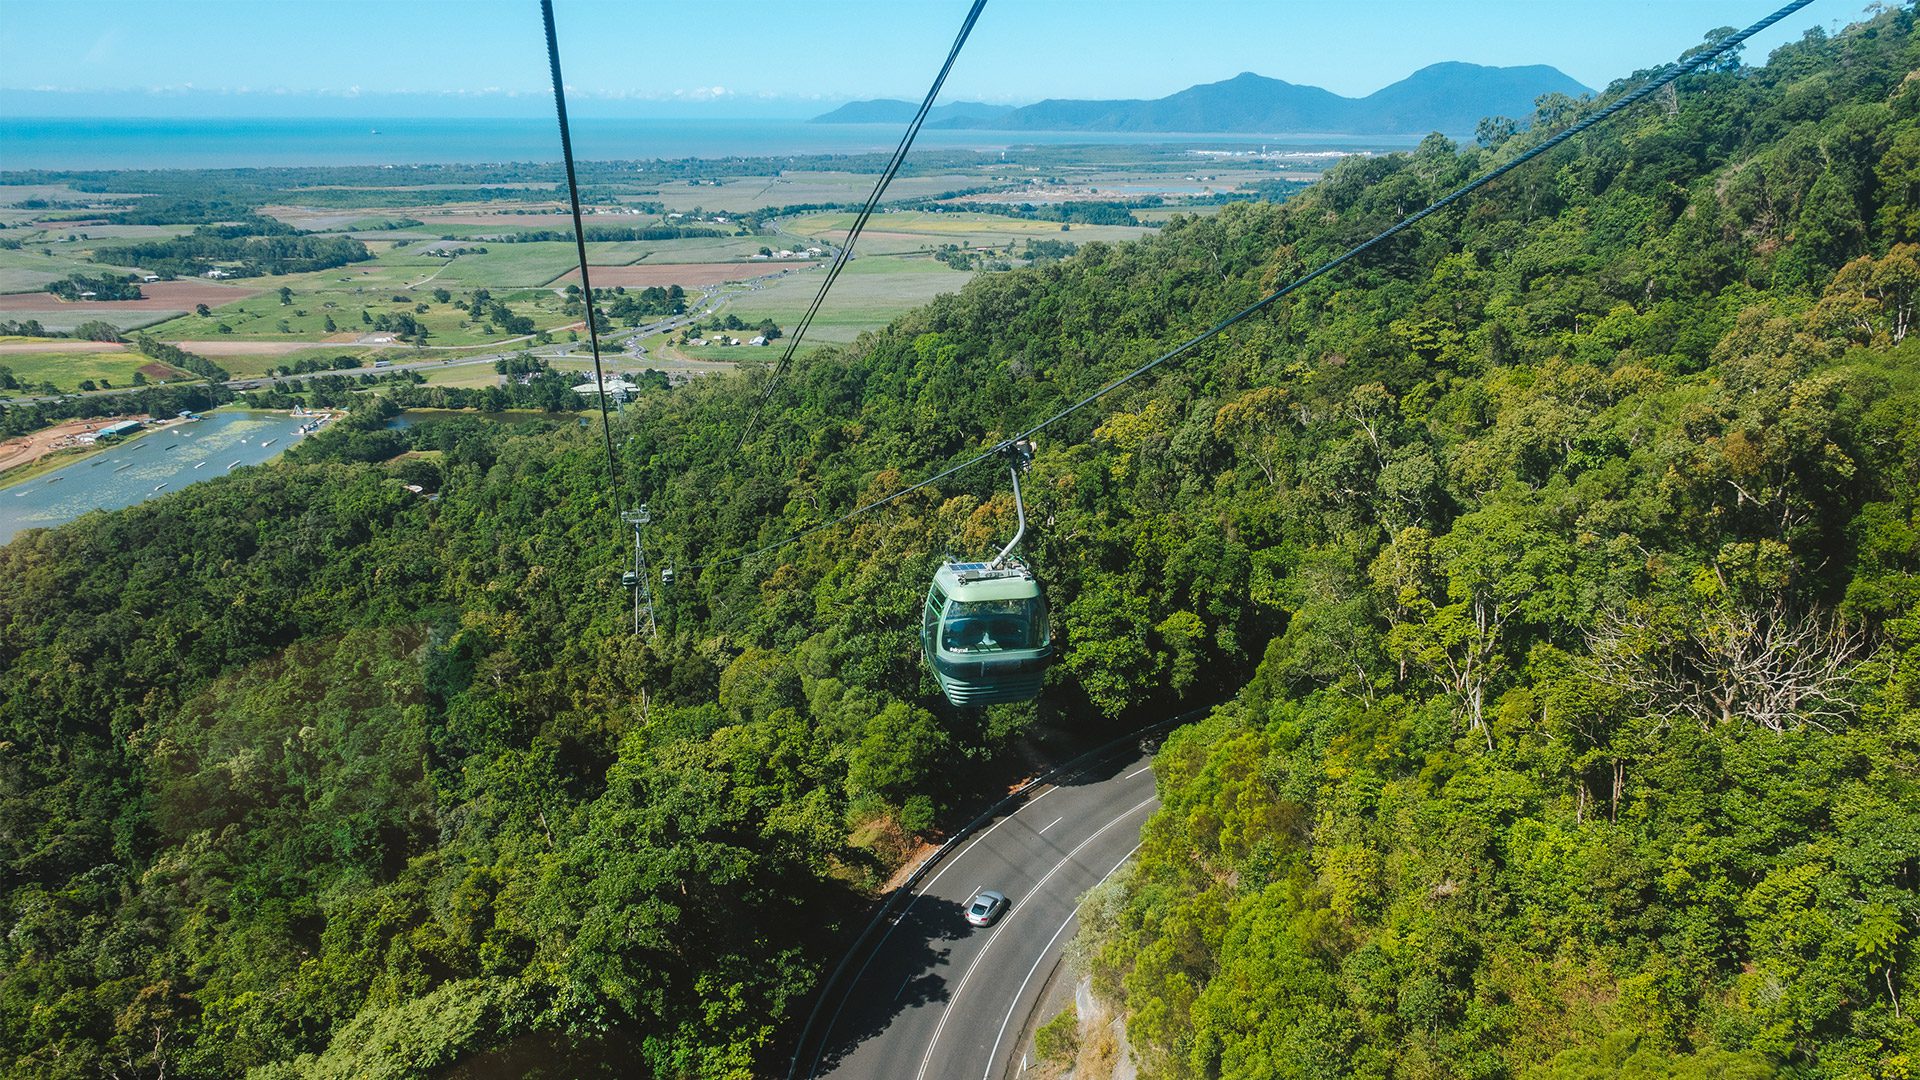 The view from the Kuranda Skyrail, photo by Tourism and Events Queensland